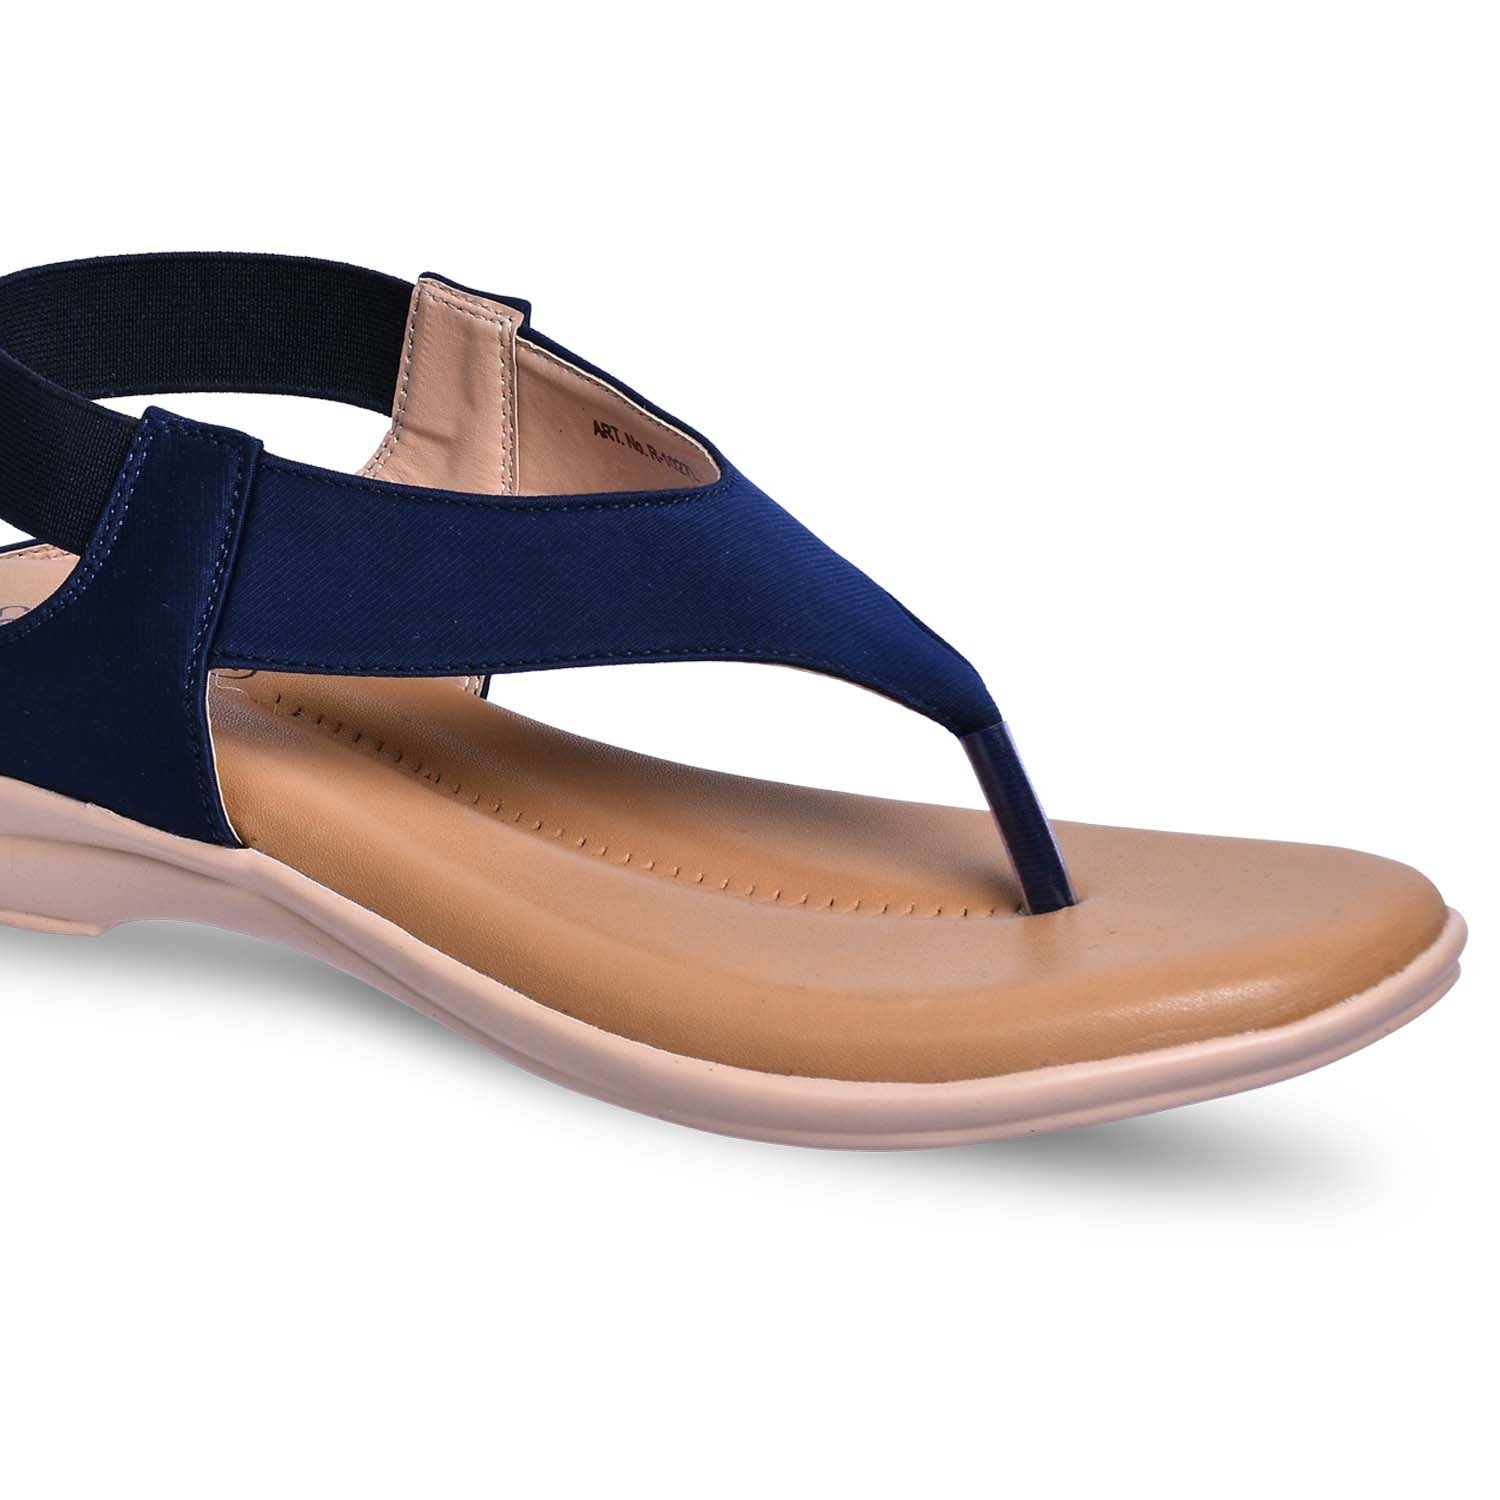 30 Walking Sandals You Can Go Miles In | Who What Wear